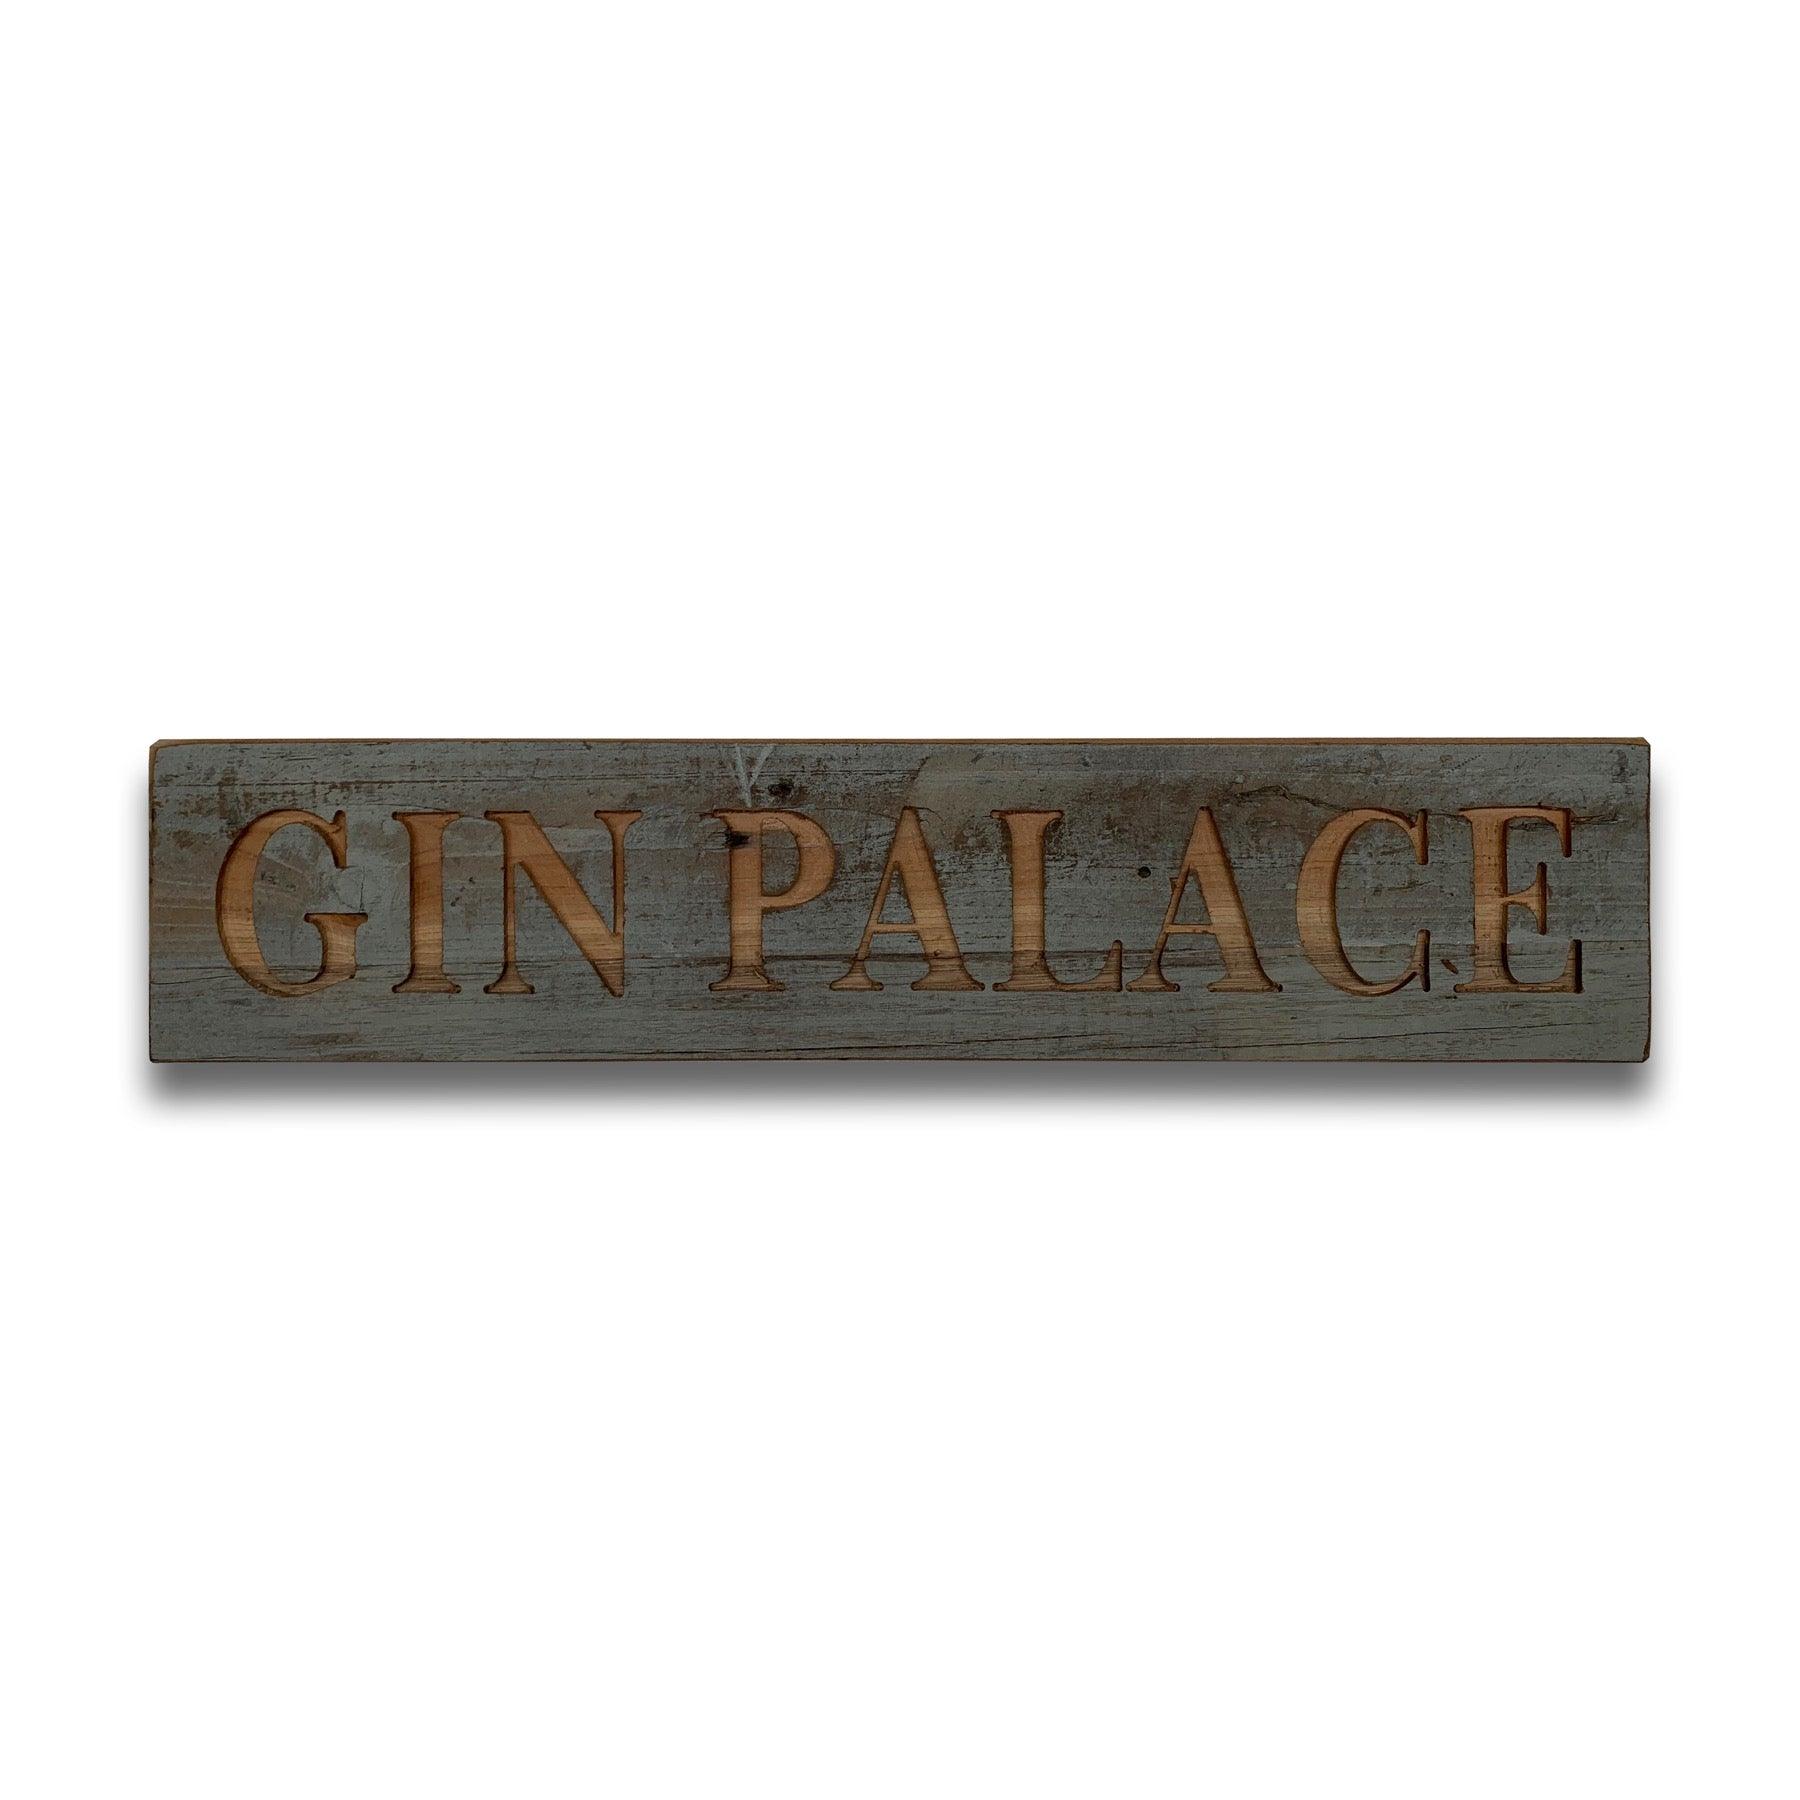 View Gin Palace Grey Wash Wooden Message Plaque information